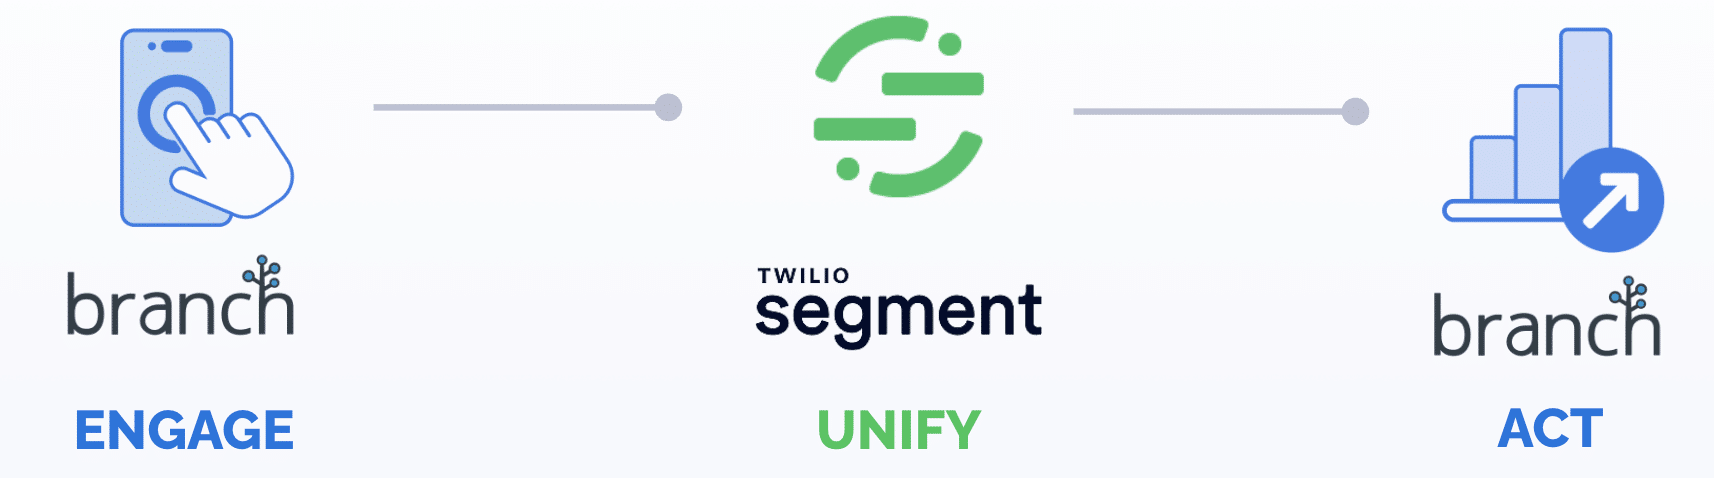 Illustrative image showing the functions of Branch and Twilio Segment. Branch enables marketers to engage users, while Twilio Segment unifies data. Then, with these insights, Branch enables marketers to act to improve user experiences and increase ROI.